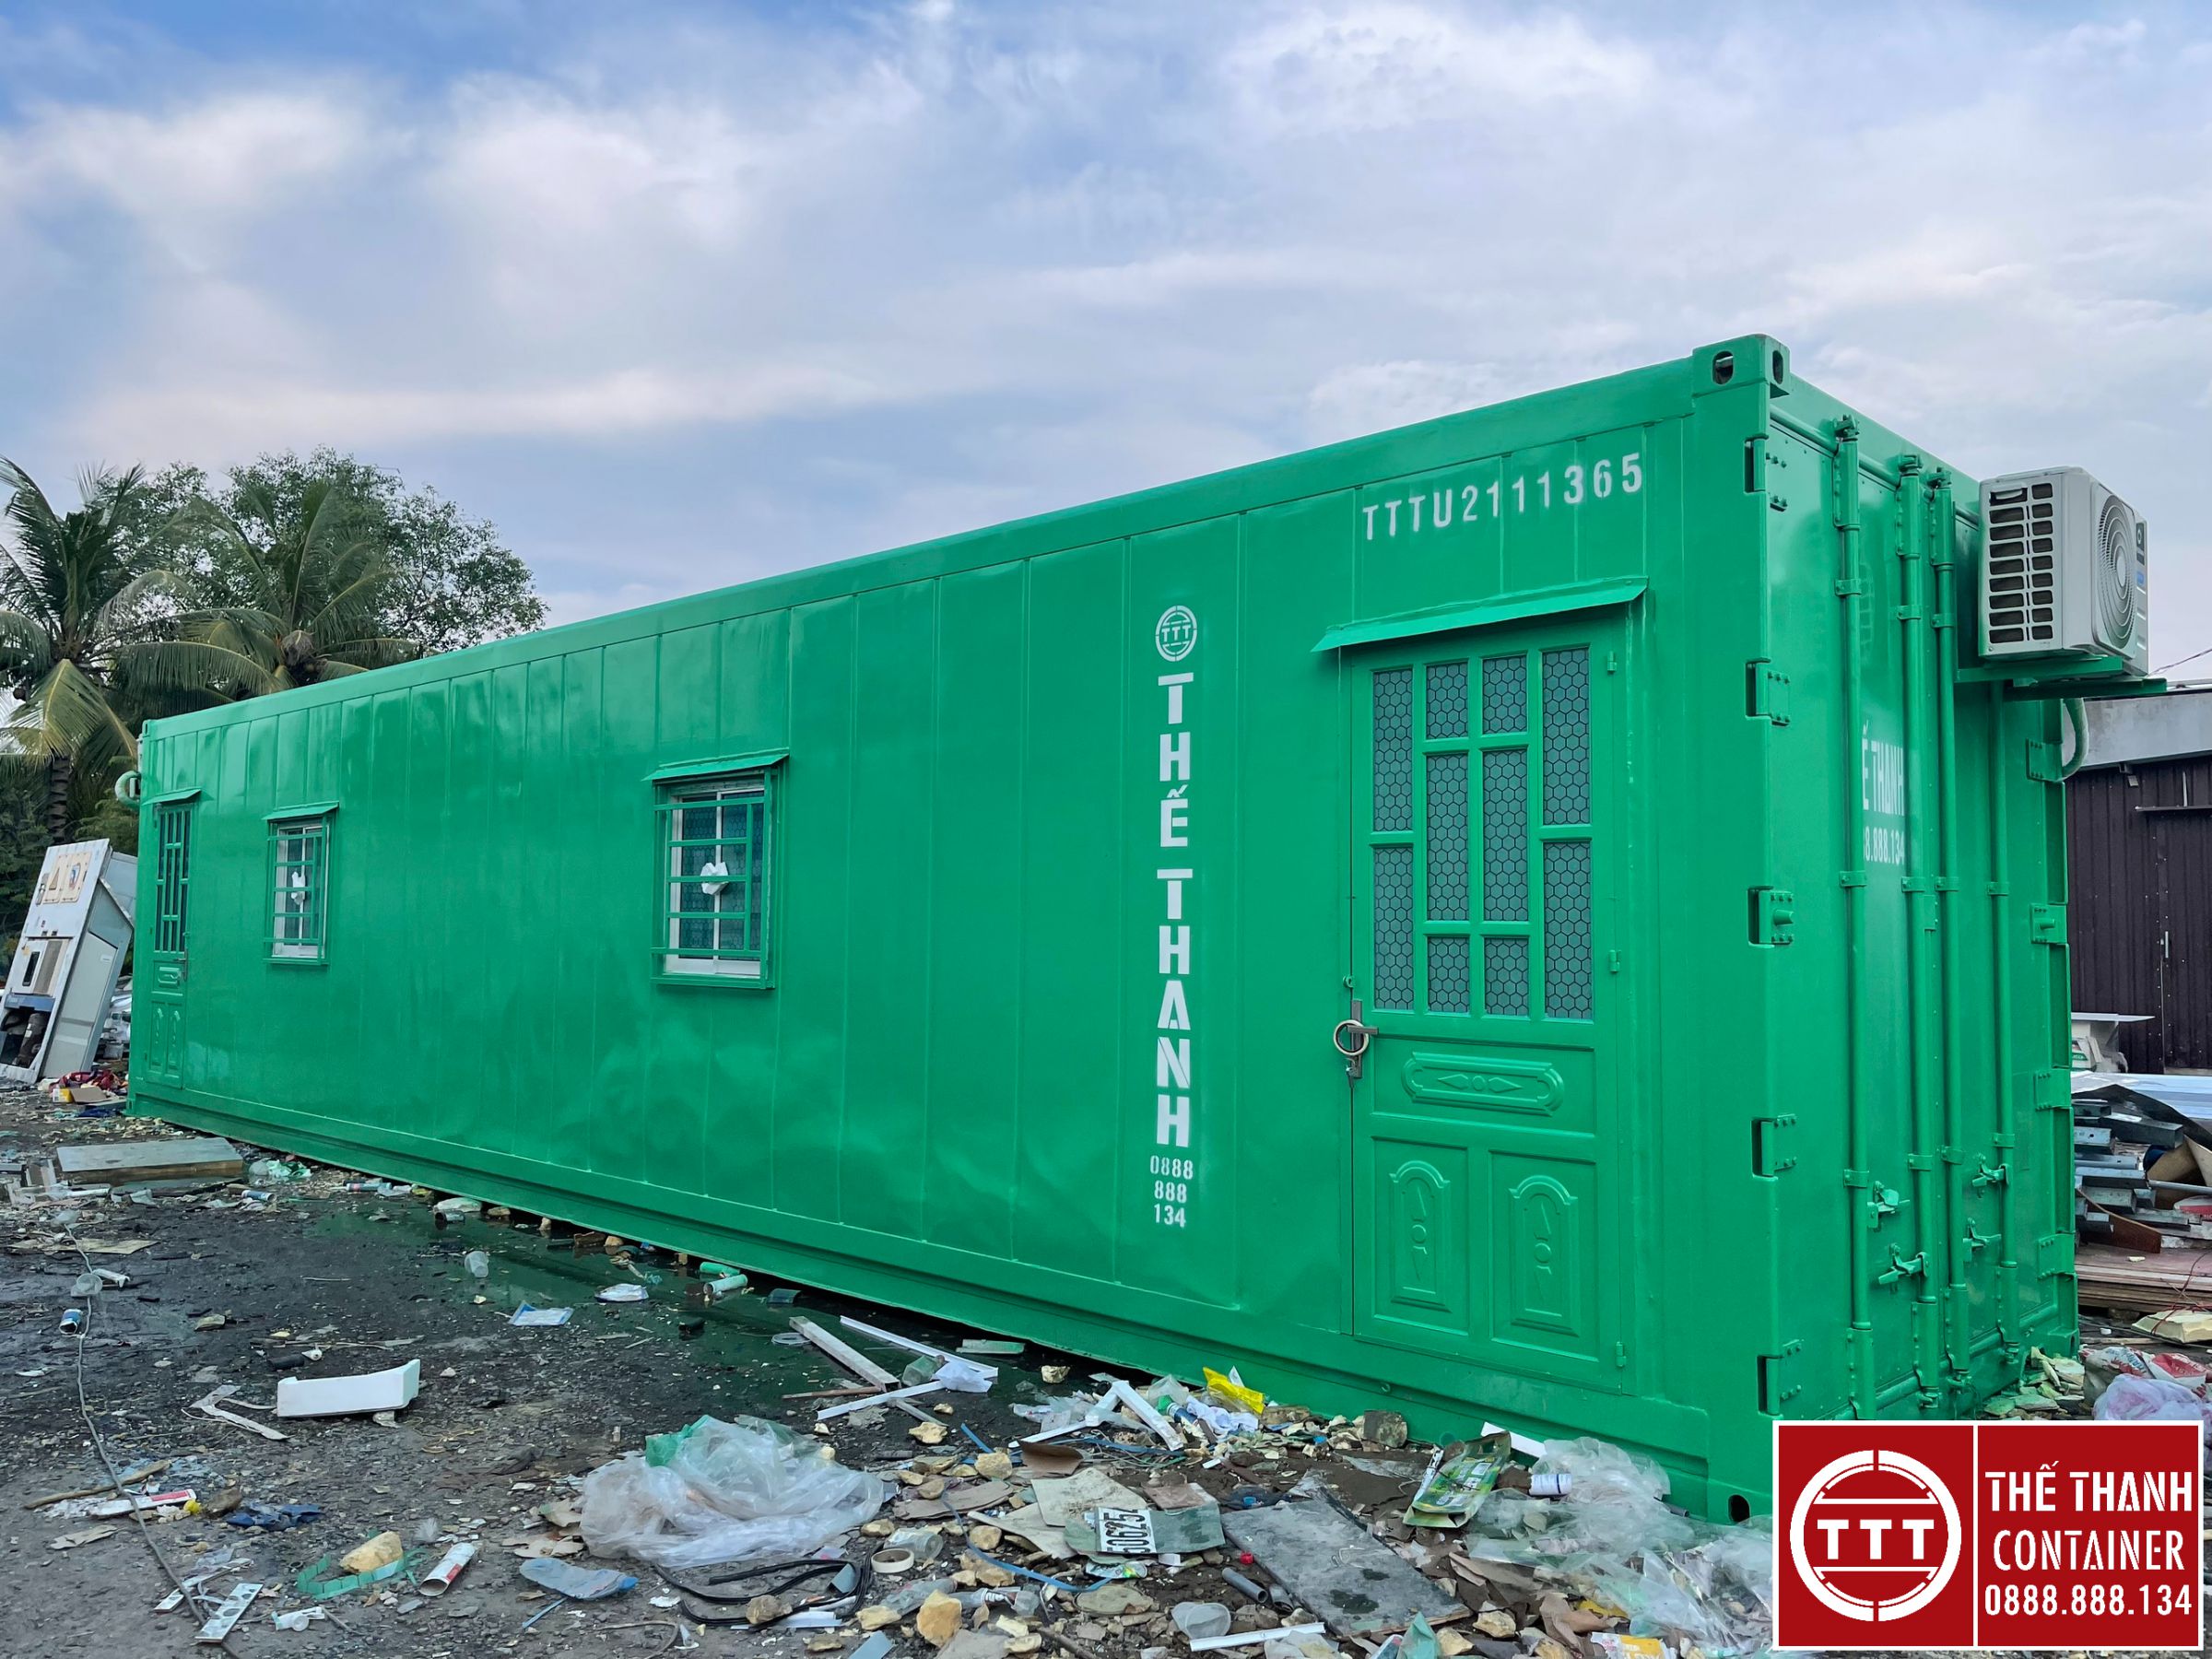 CONTAINER VĂN PHÒNG 40 FEET TỪ CONTAINER LẠNH